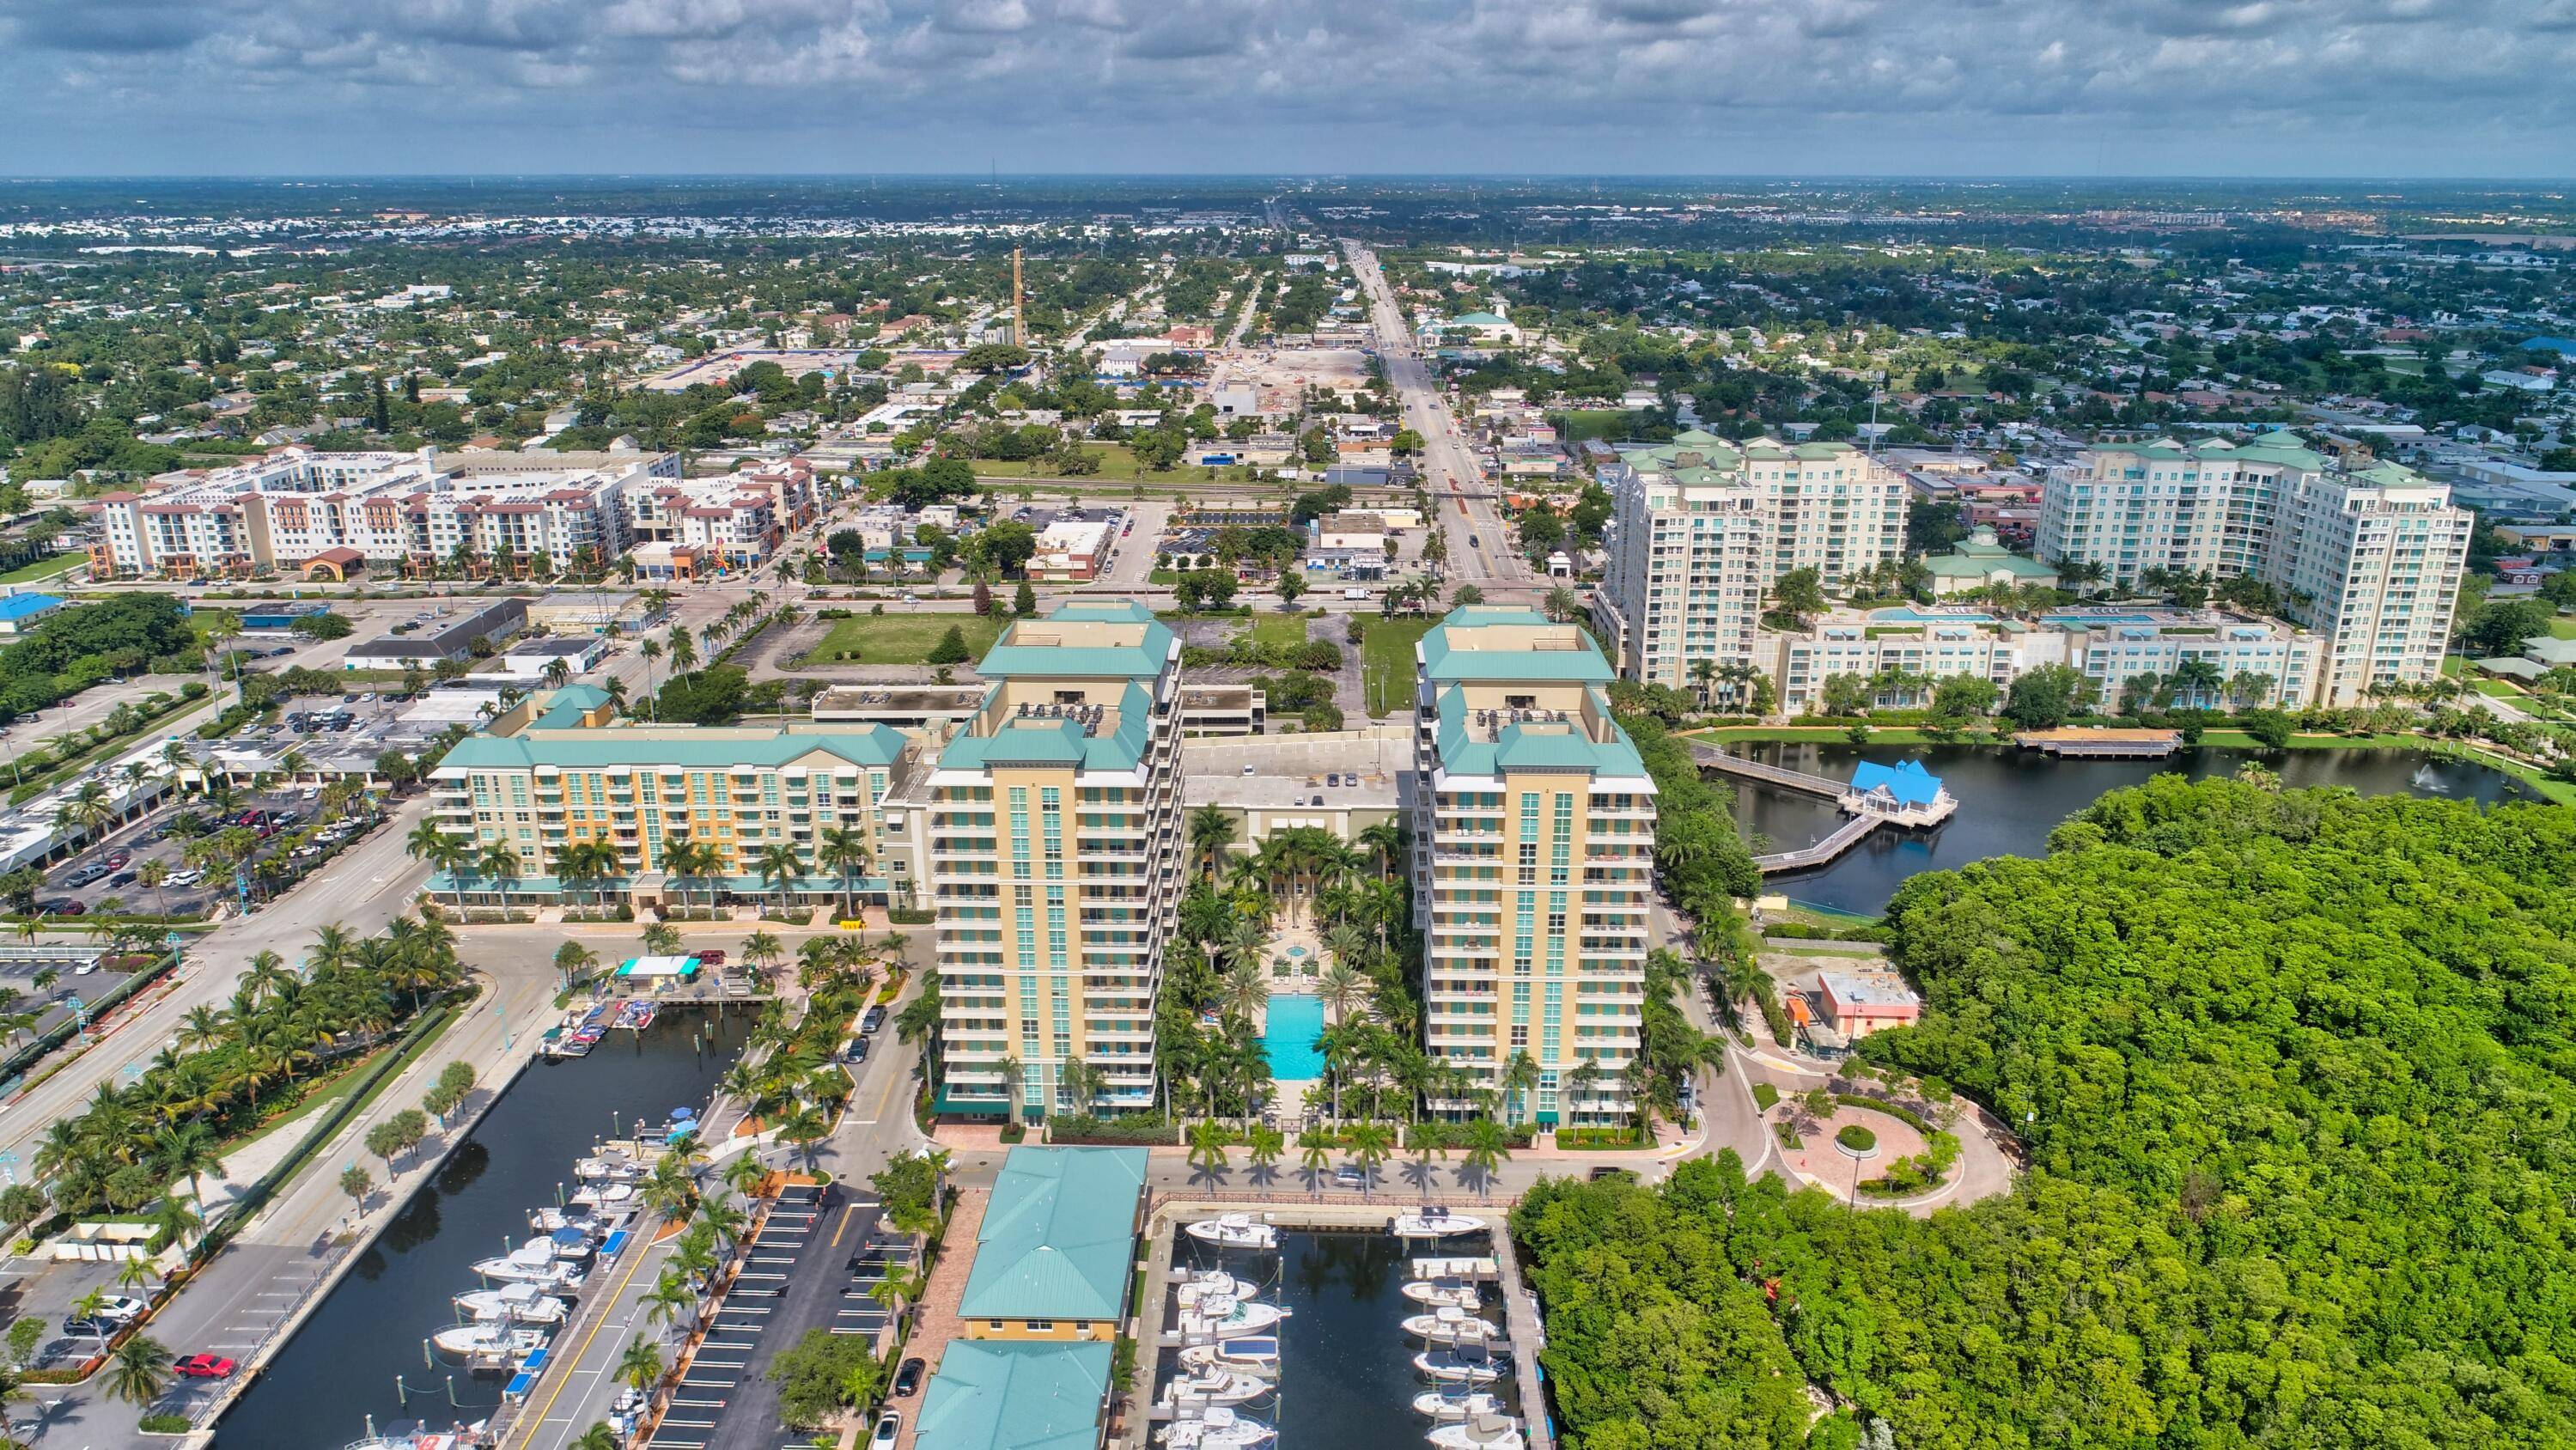 Step into your personal oasis with this remarkable 2 bedroom, 2 bathroom condo featuring an expansive wraparound balcony offering unparalleled views of the serene marina and glistening water.